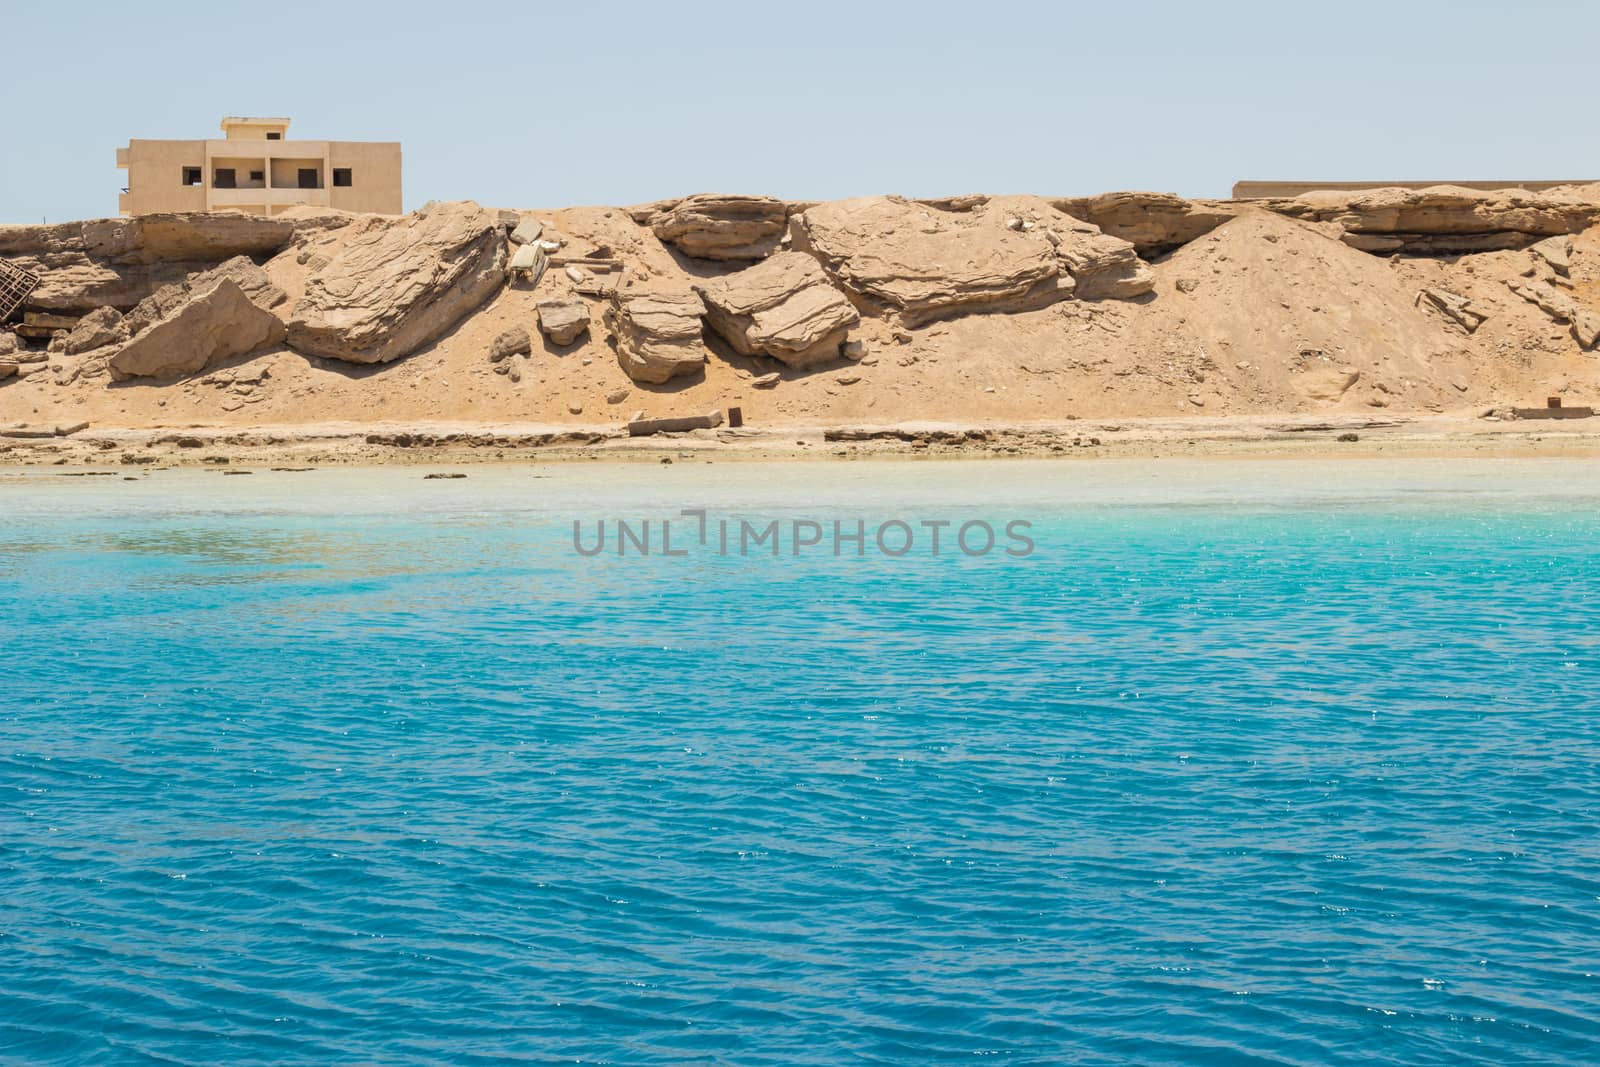 Travel, the month of May, Egypt Red Sea views